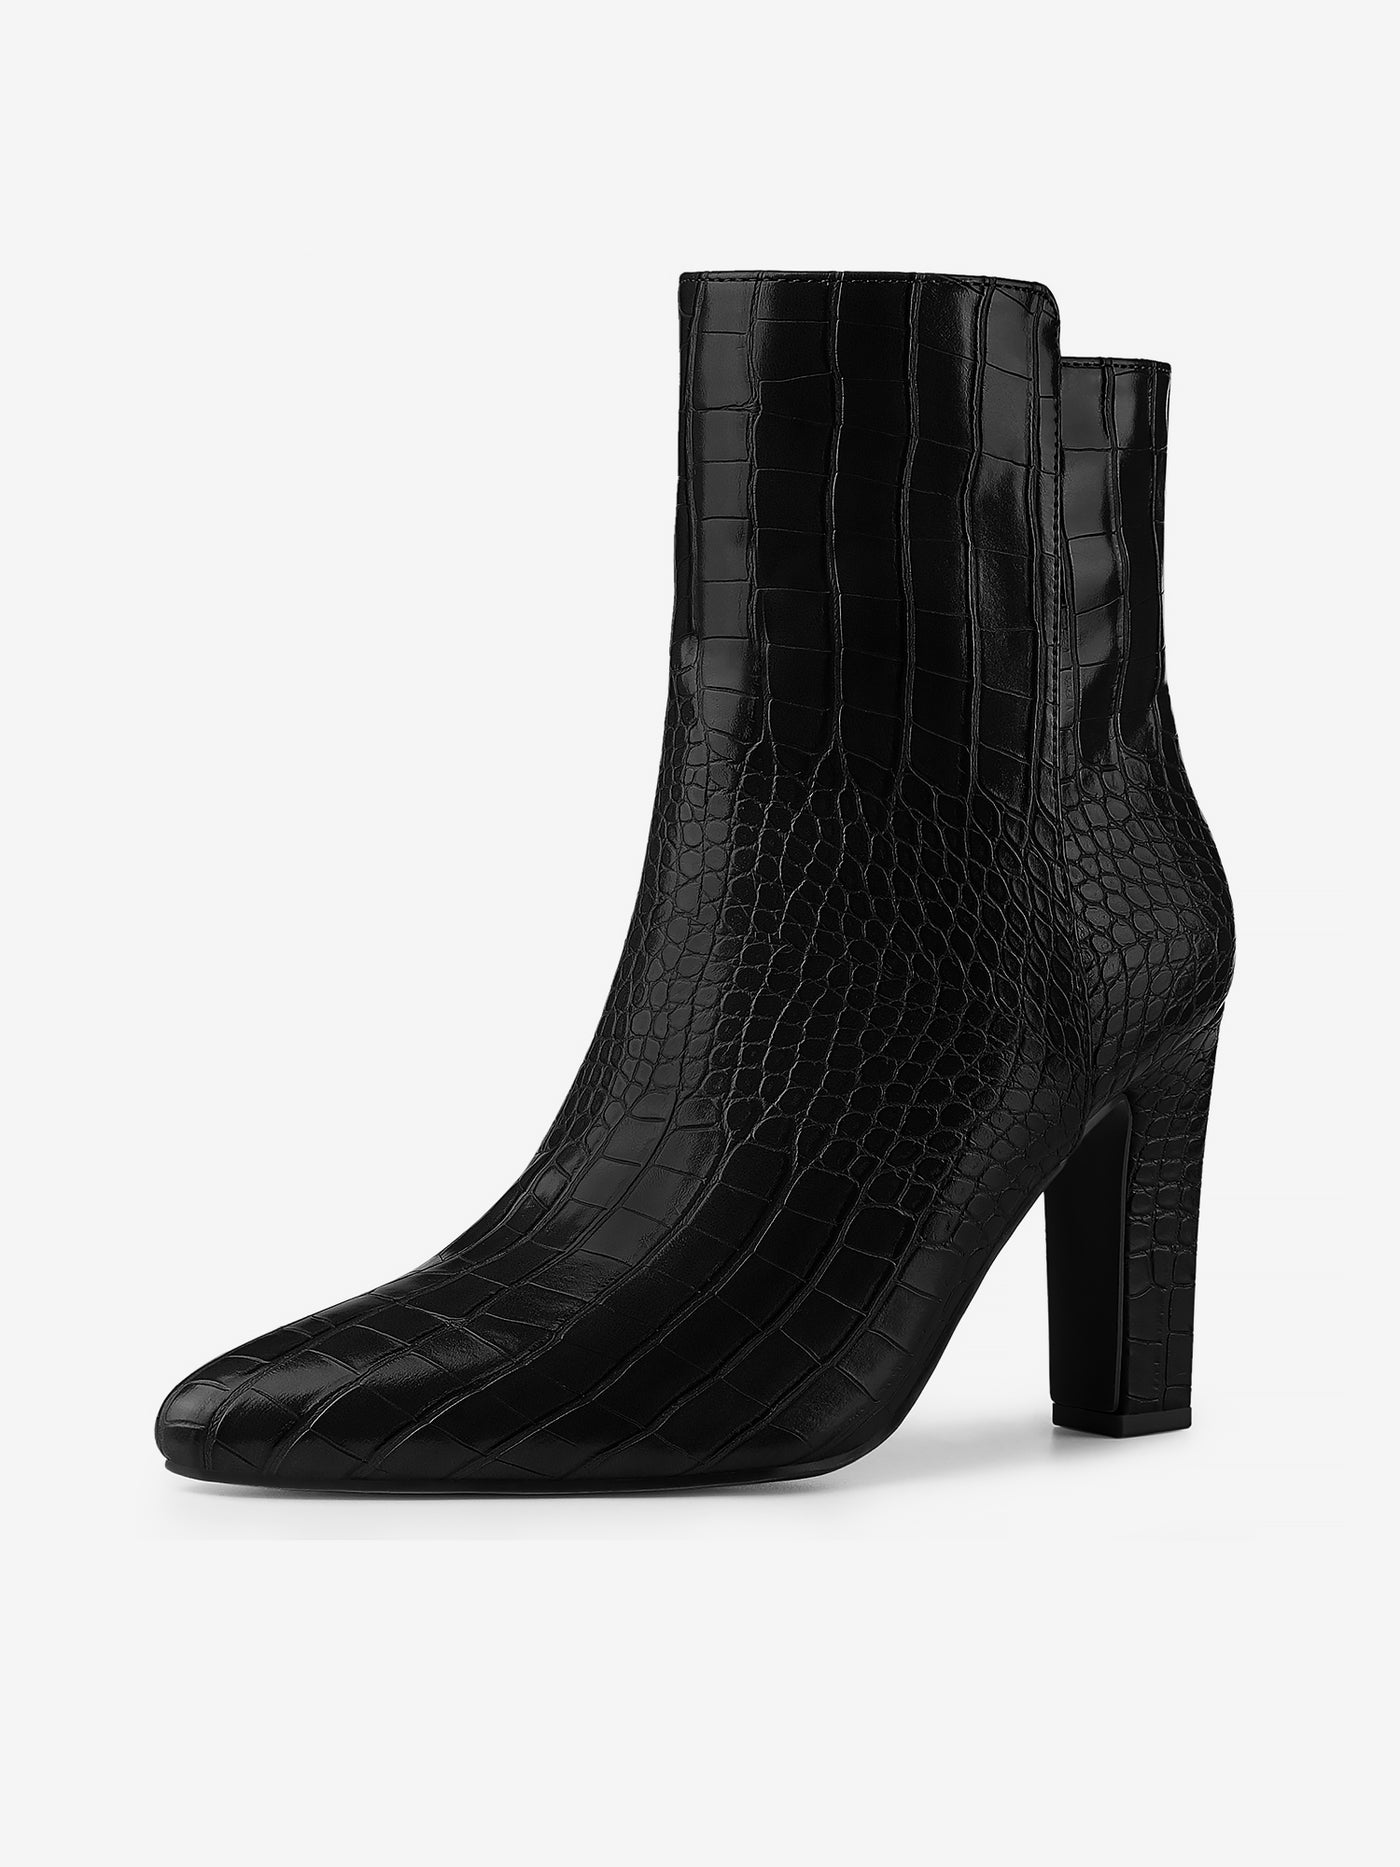 Allegra K Crocodile Printed Pointed Toe Chunky Heel Ankle Boots